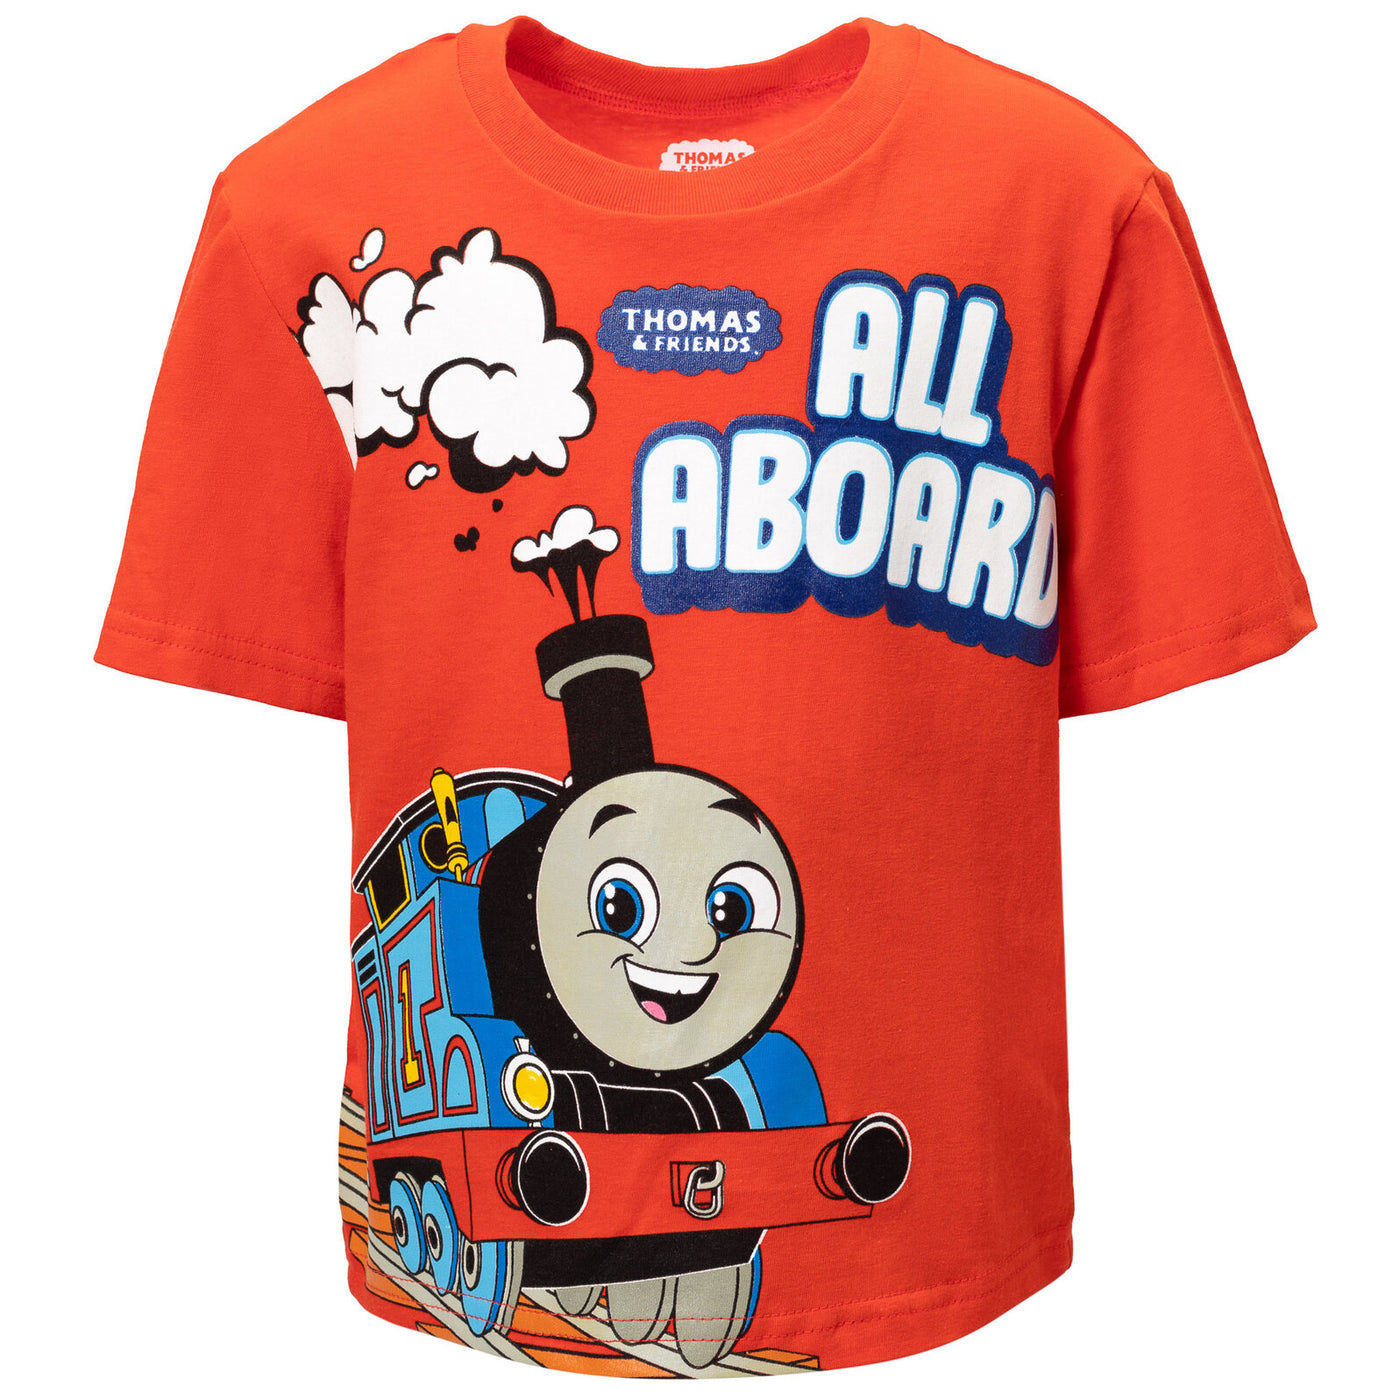 Thomas & Friends T-Shirt Tank Top and French Terry Shorts 3 Piece Outfit Set